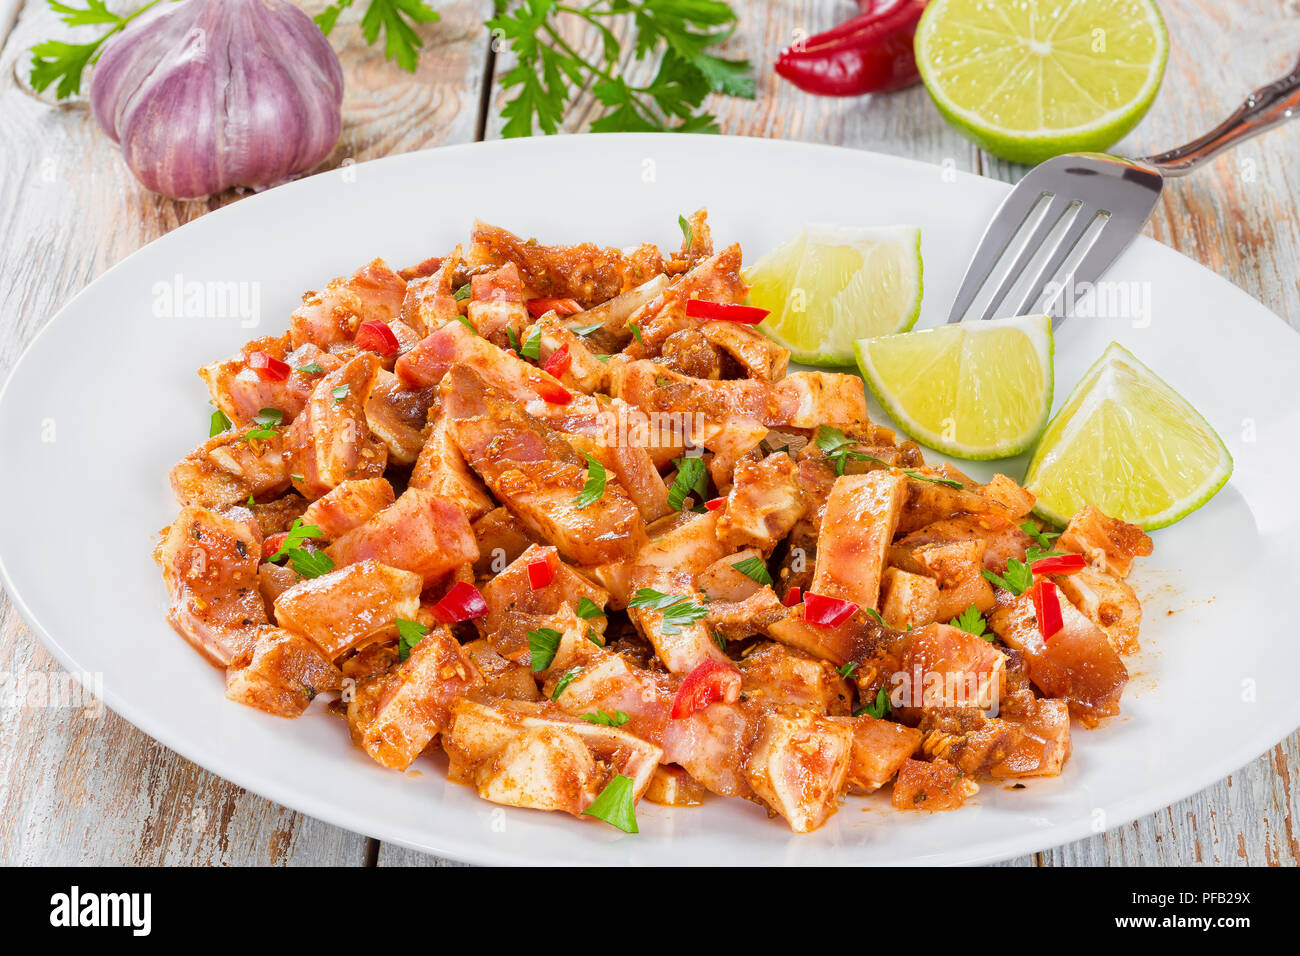 Braised Pig Ears or Oreja de Cerdo with spices, chili pepper, pieces of lime sprinkled with parsley on white platter on natural wooden old boards, clo Stock Photo